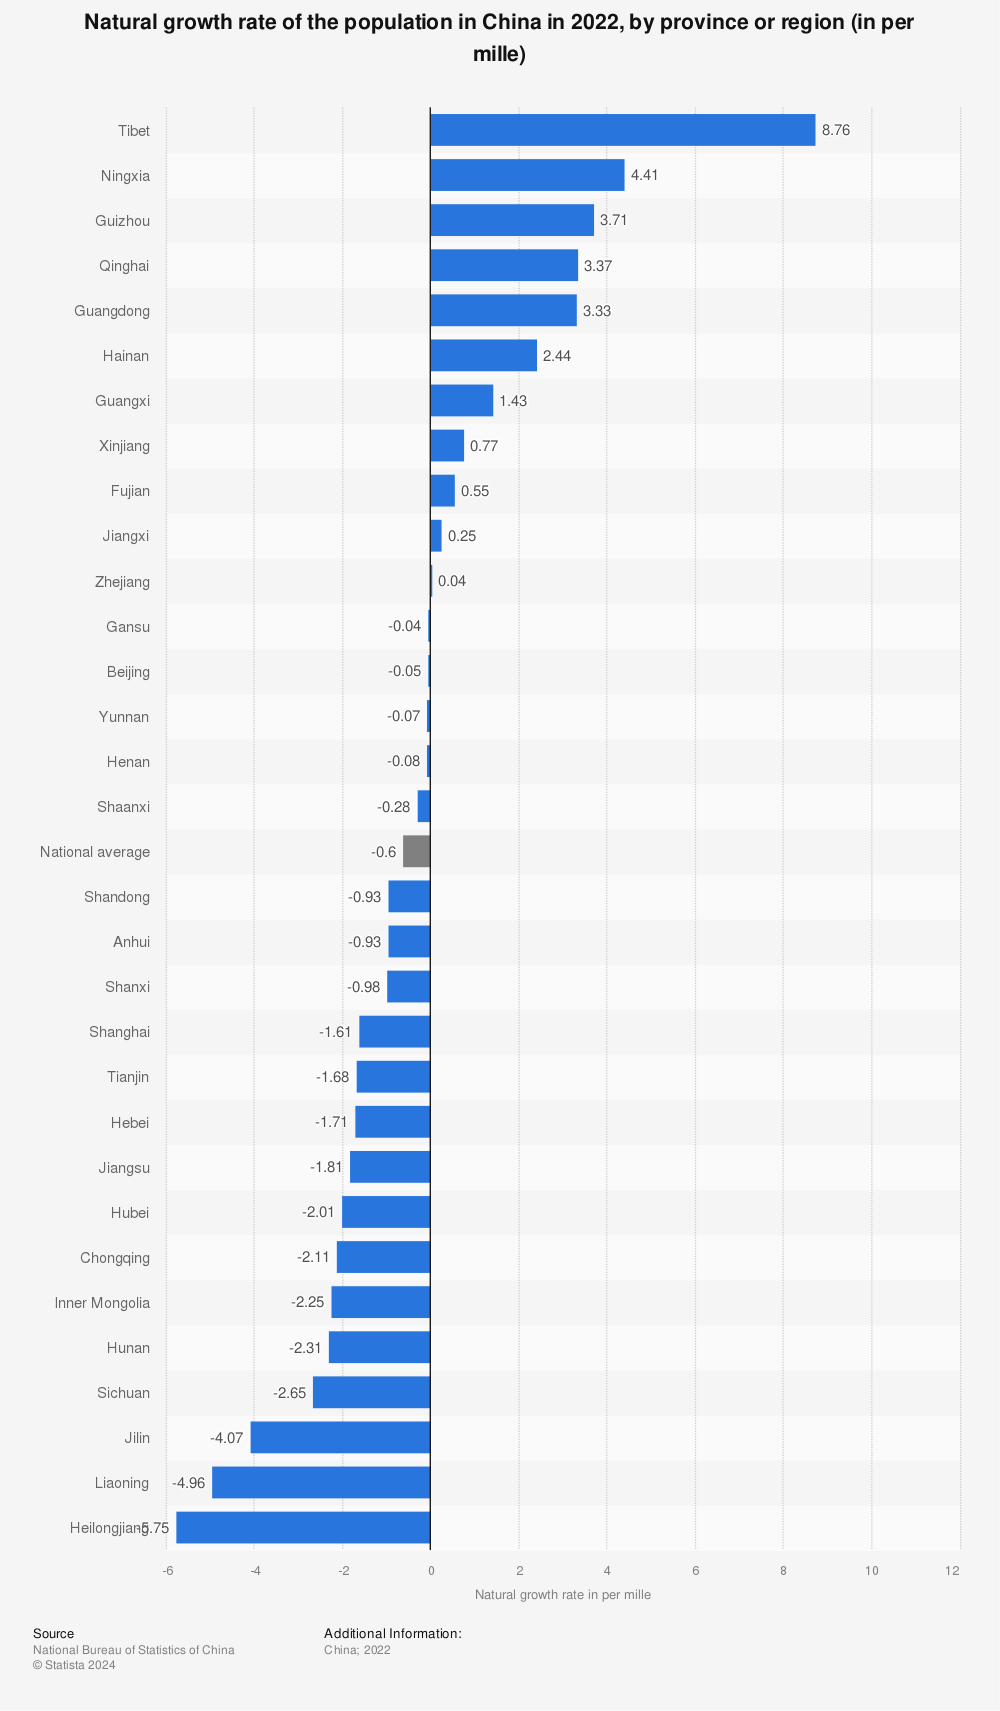 Statistic: Natural growth rate of the population in China in 2019, by province or region (in per mille) | Statista